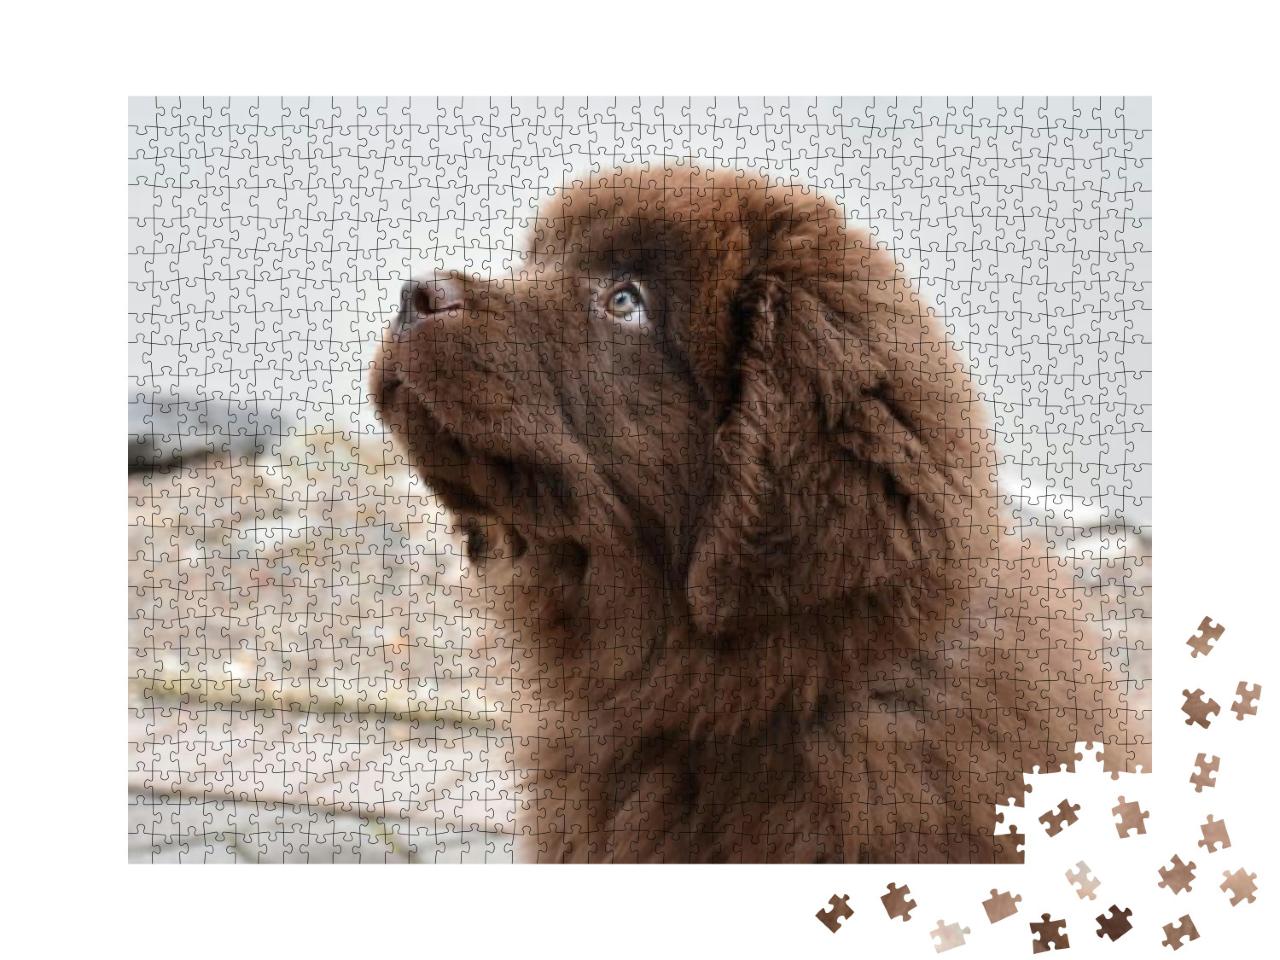 Purebred Brown Newfoundland Puppy Dog Gazing Up... Jigsaw Puzzle with 1000 pieces